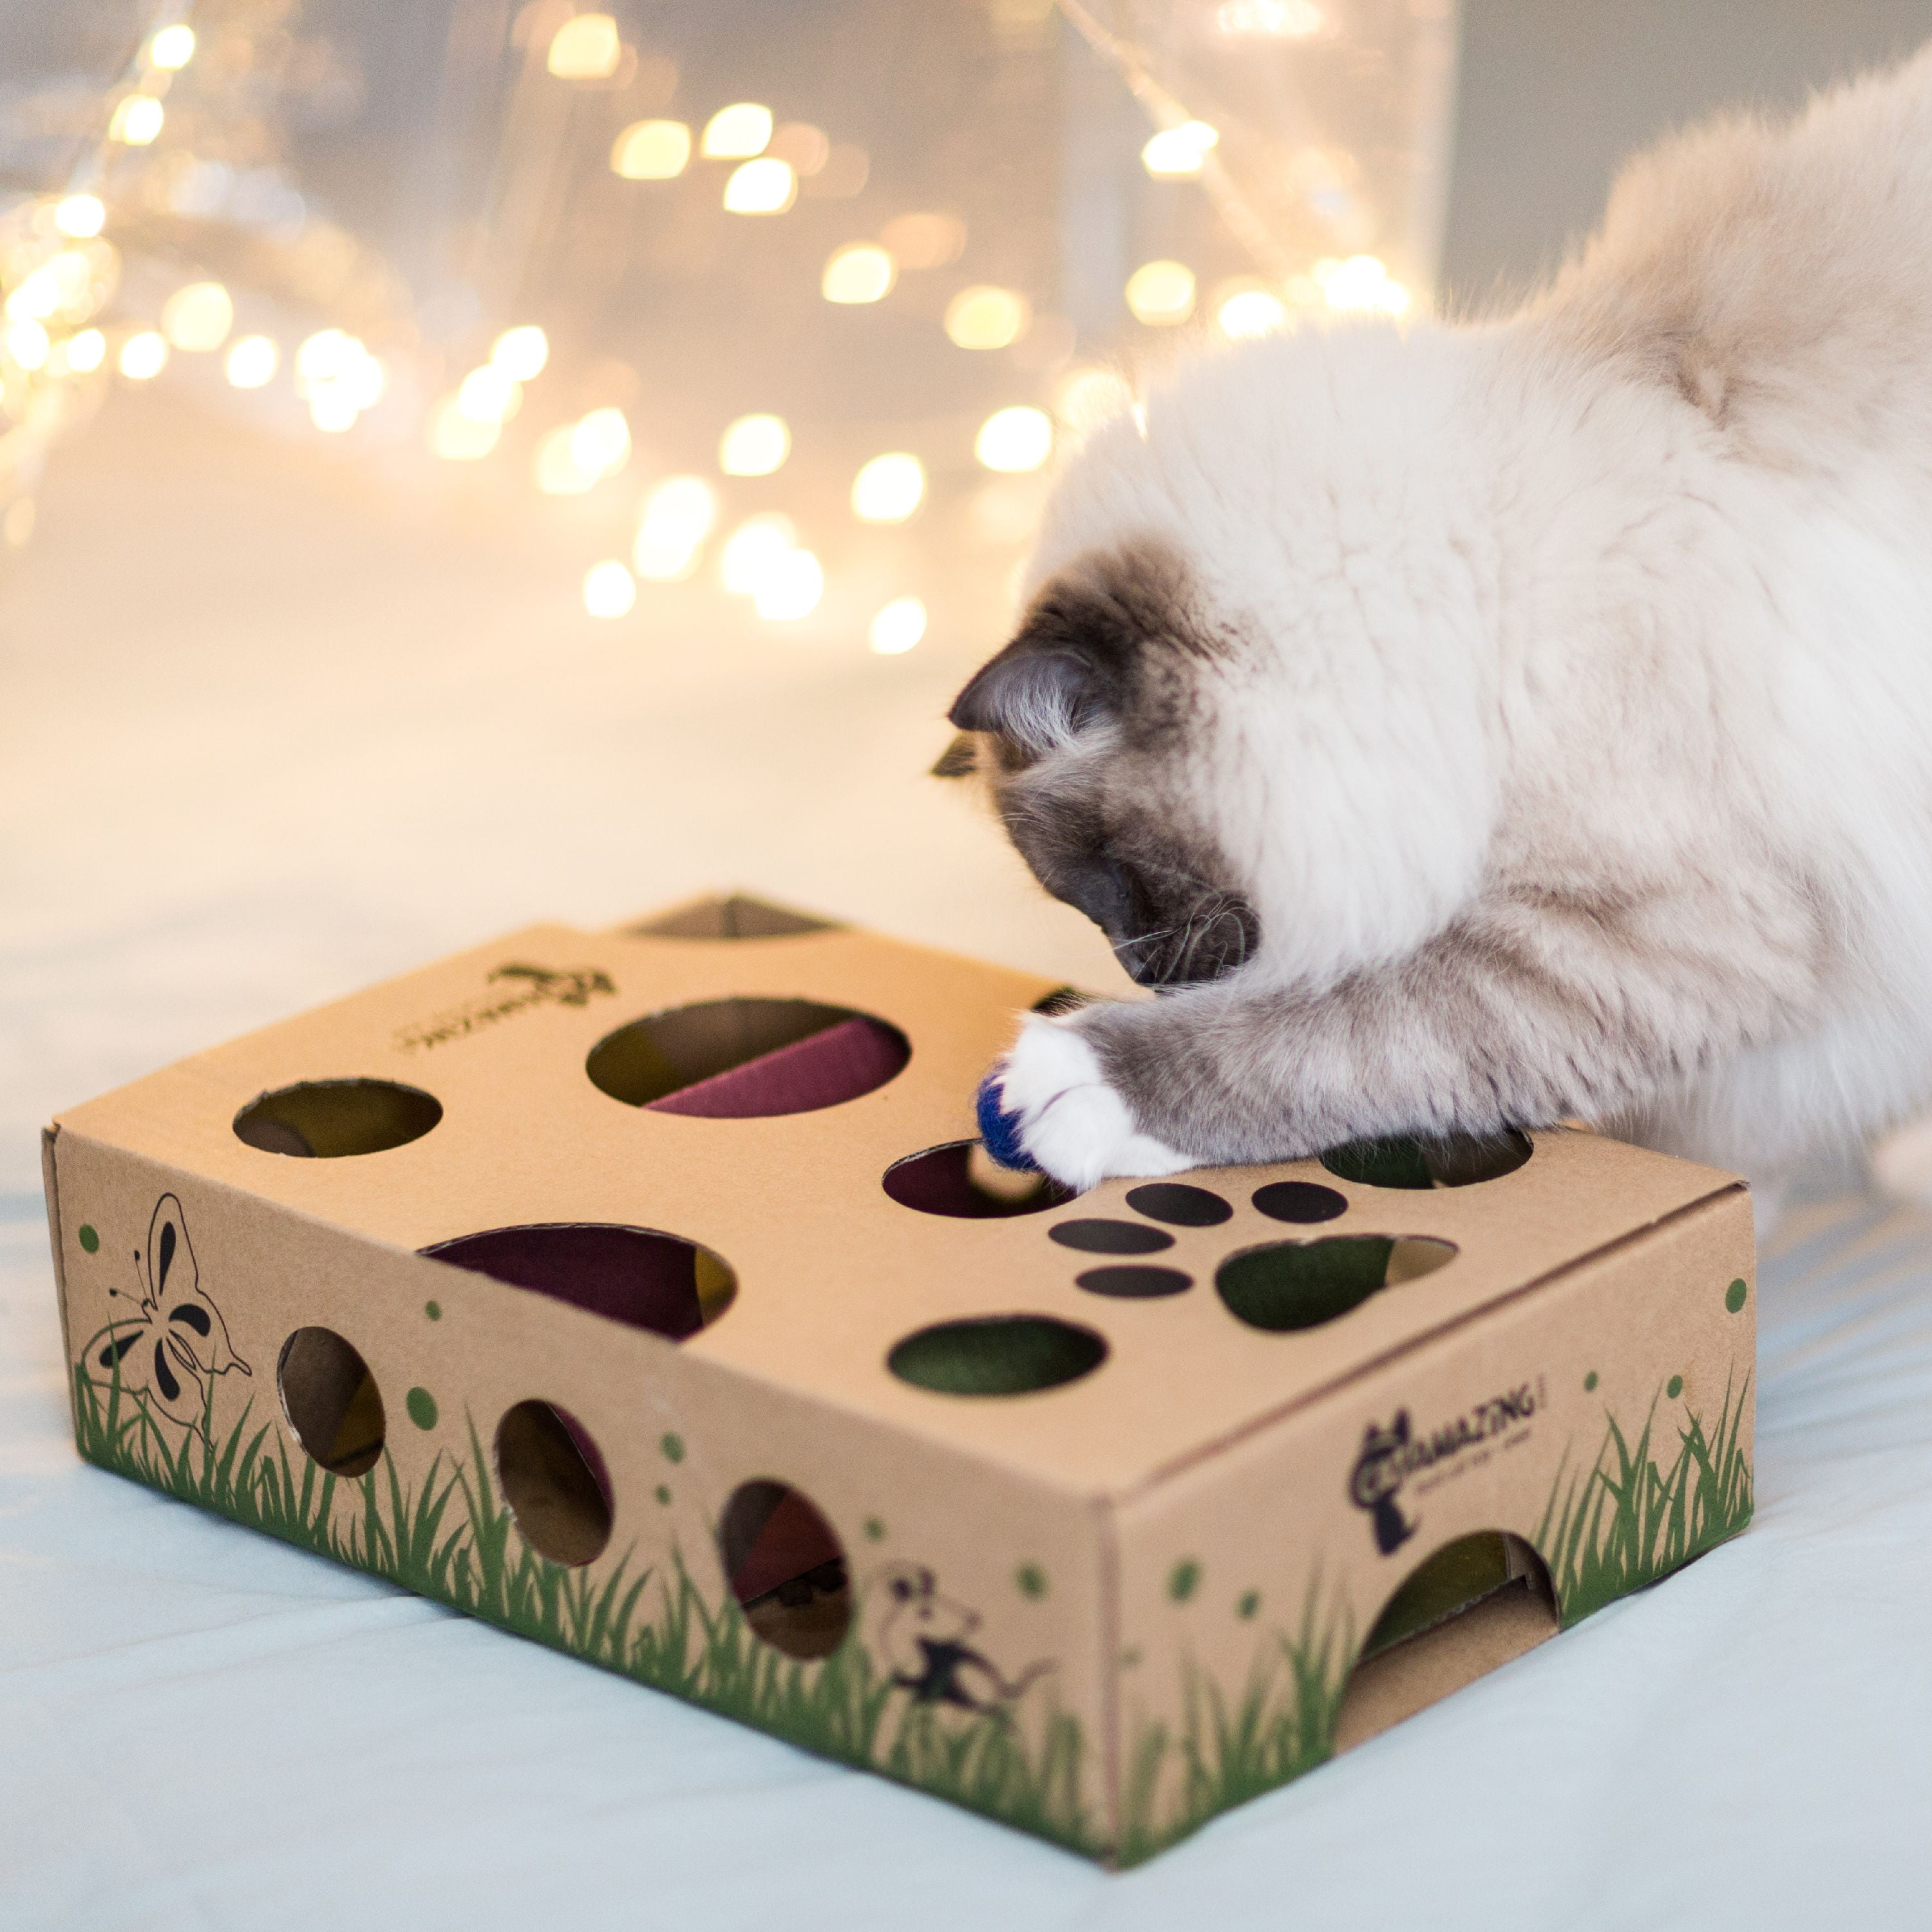 AOCCIT Cat Toy Indoor for Cats Interactive Best Kitten Puzzle Toys Seller  Kitty Treasure Chest Puzzles Smart stimulating Mental Stimulation Brain